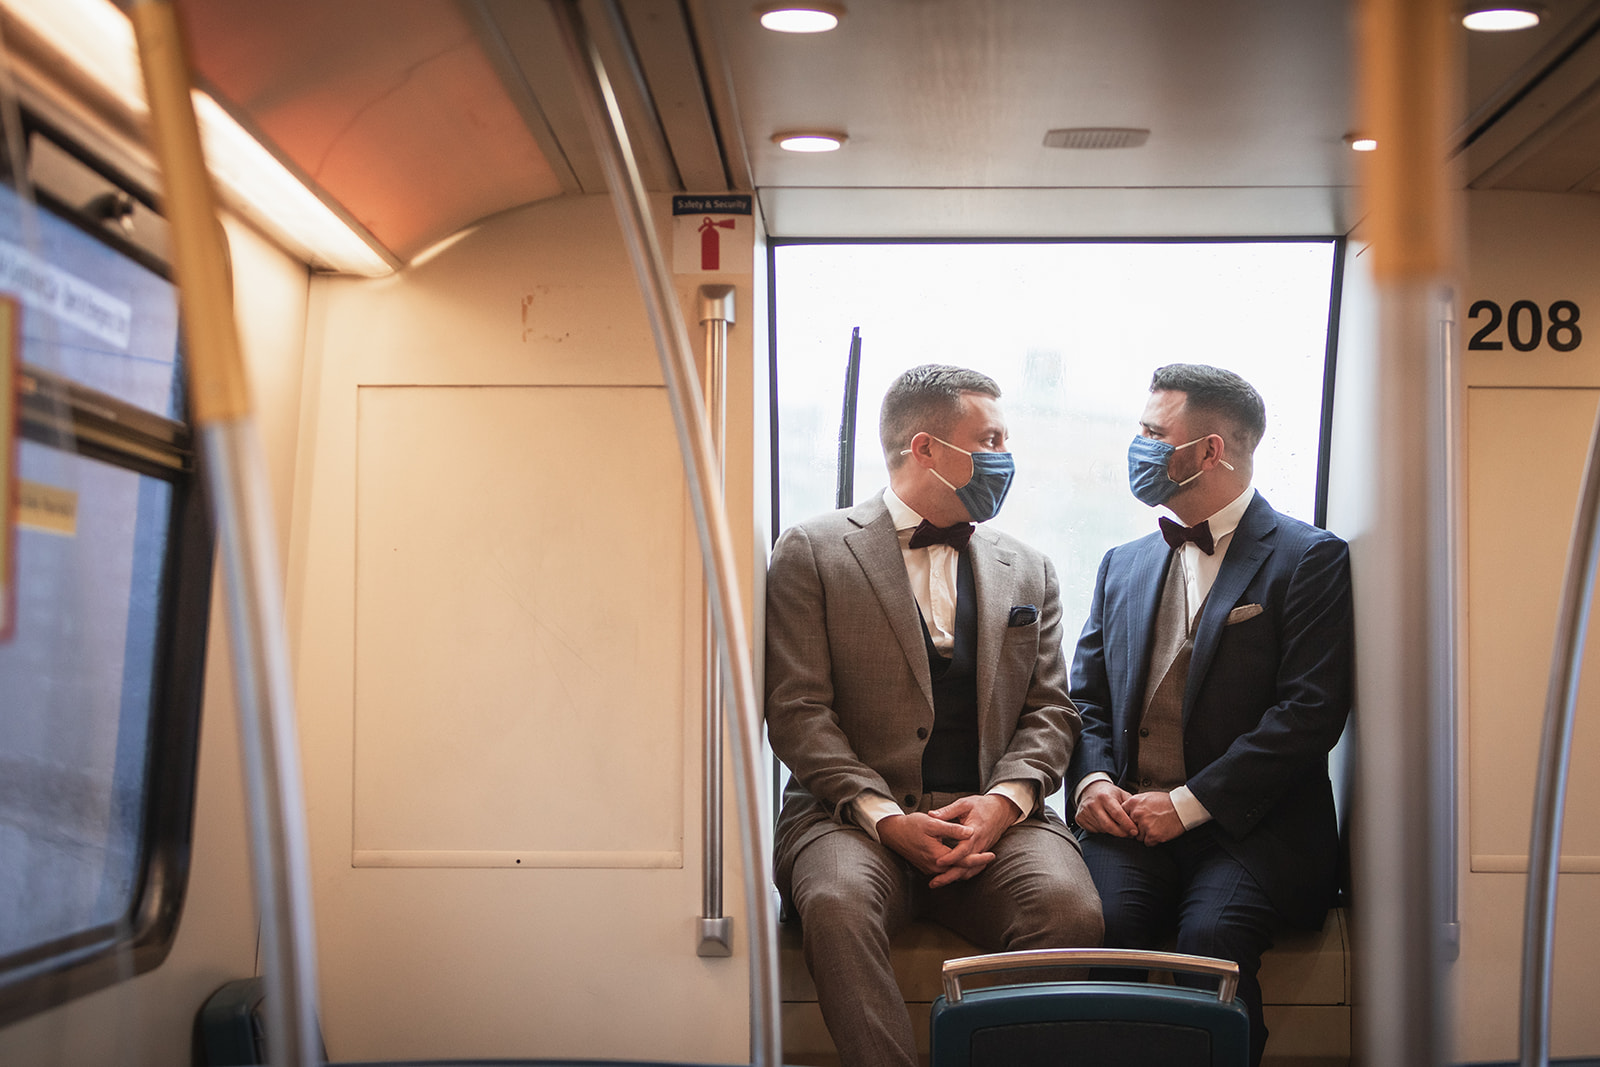 Two grooms sit at the front of the SkyTrain gazing into each others eyes